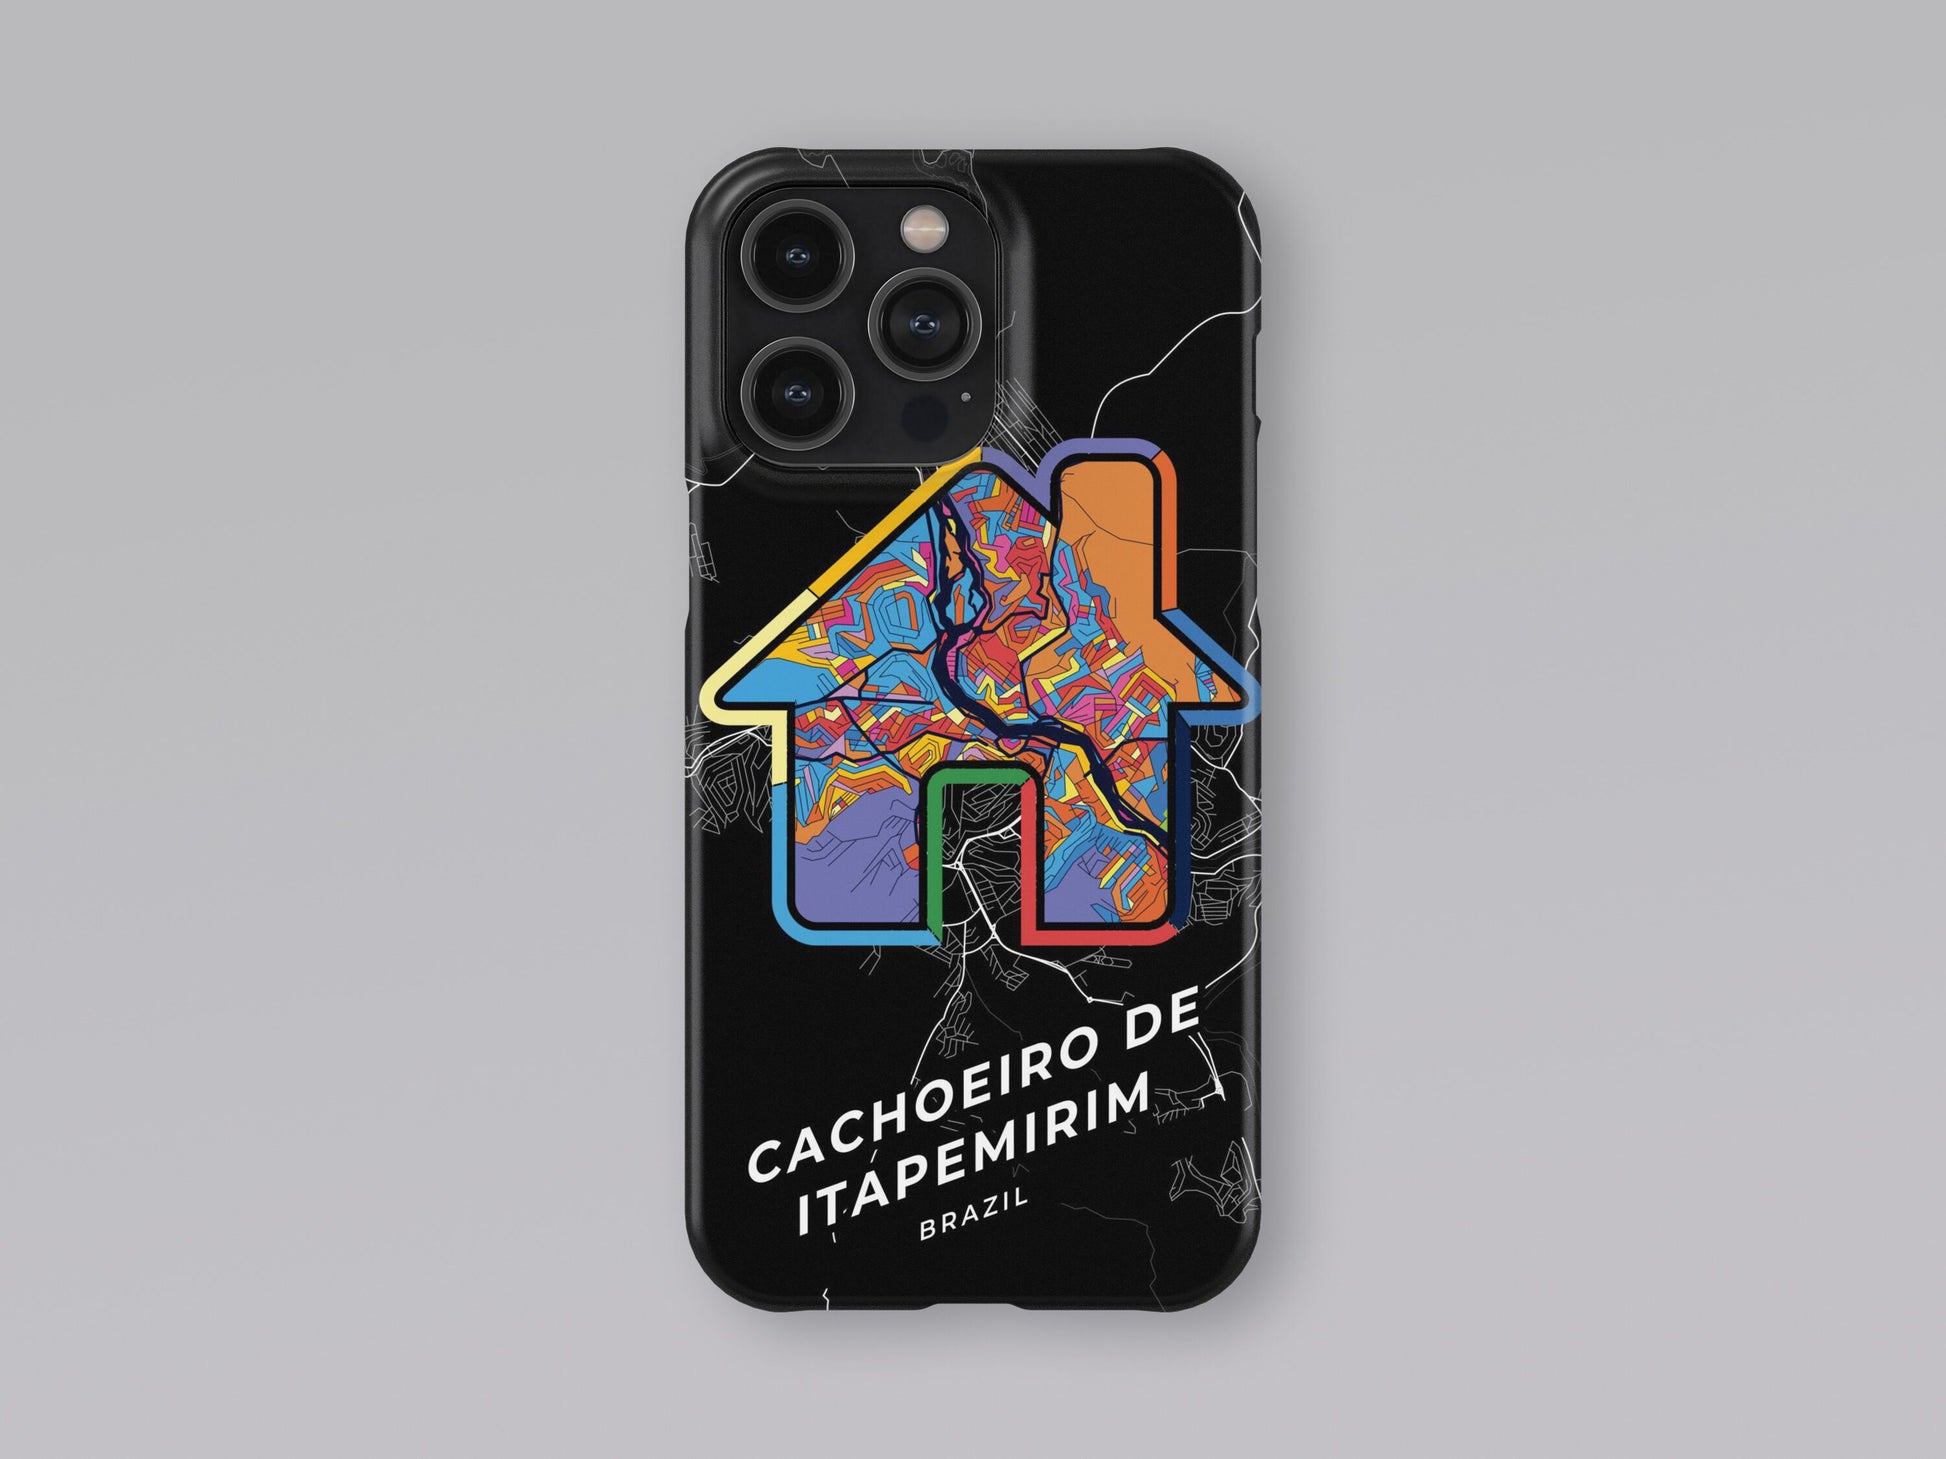 Cachoeiro De Itapemirim Brazil slim phone case with colorful icon. Birthday, wedding or housewarming gift. Couple match cases. 3